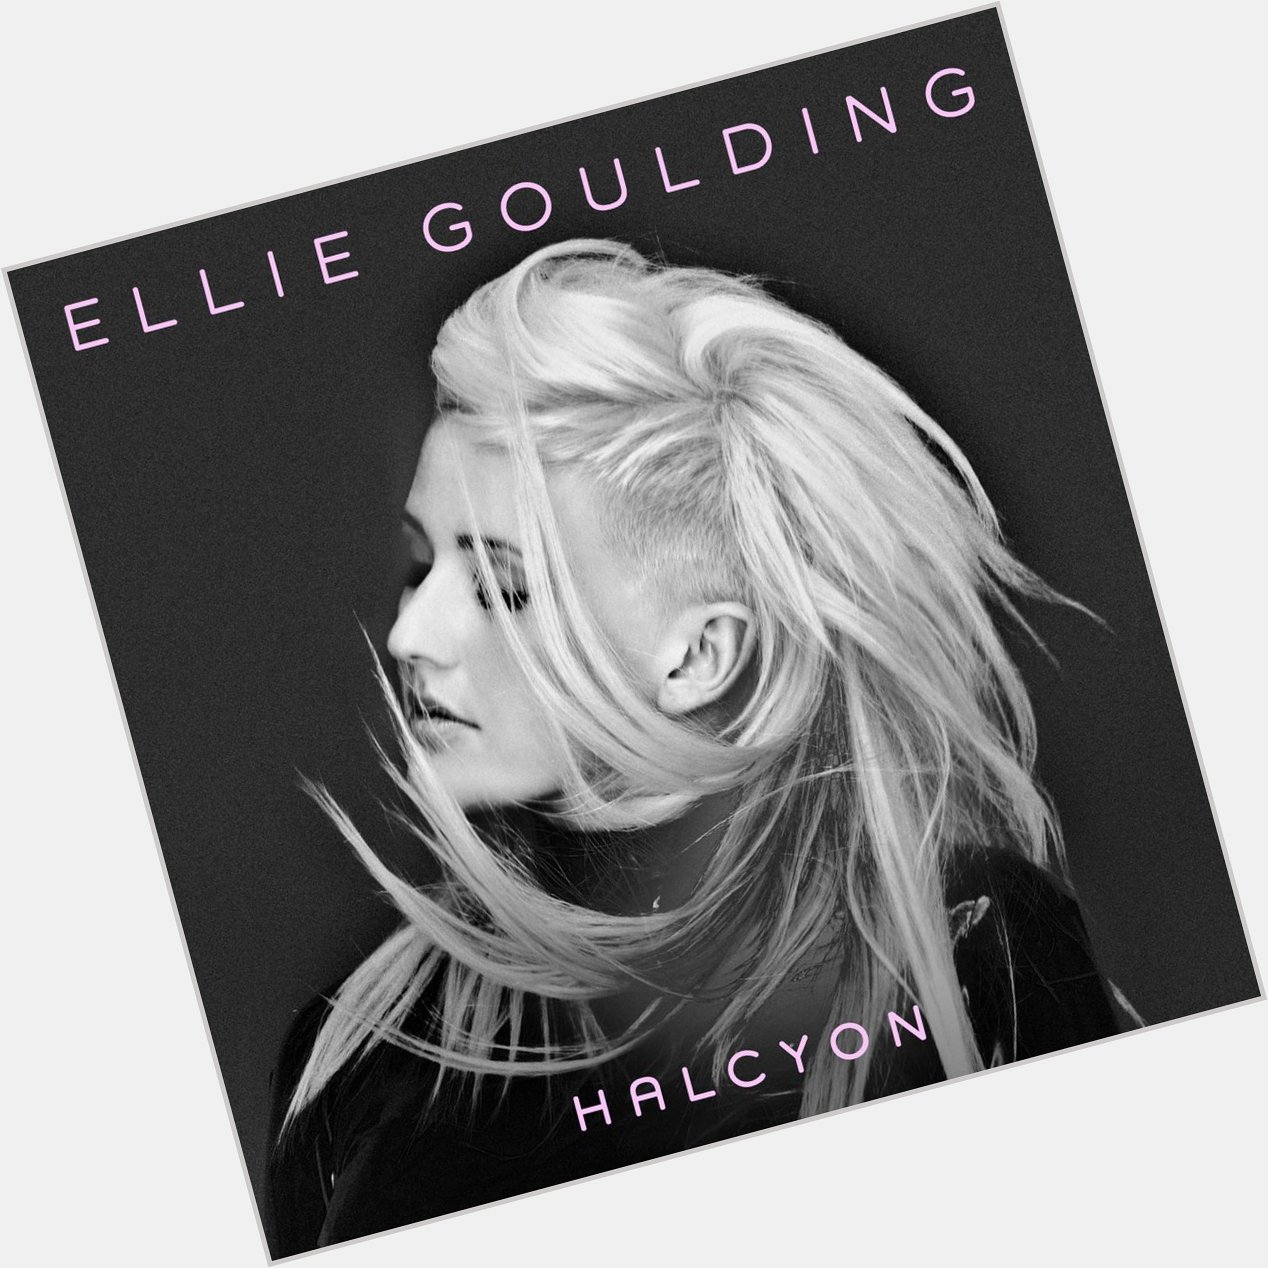 Happy 29th birthday to Ellie Goulding! We\re bumpin\ our fave record,  